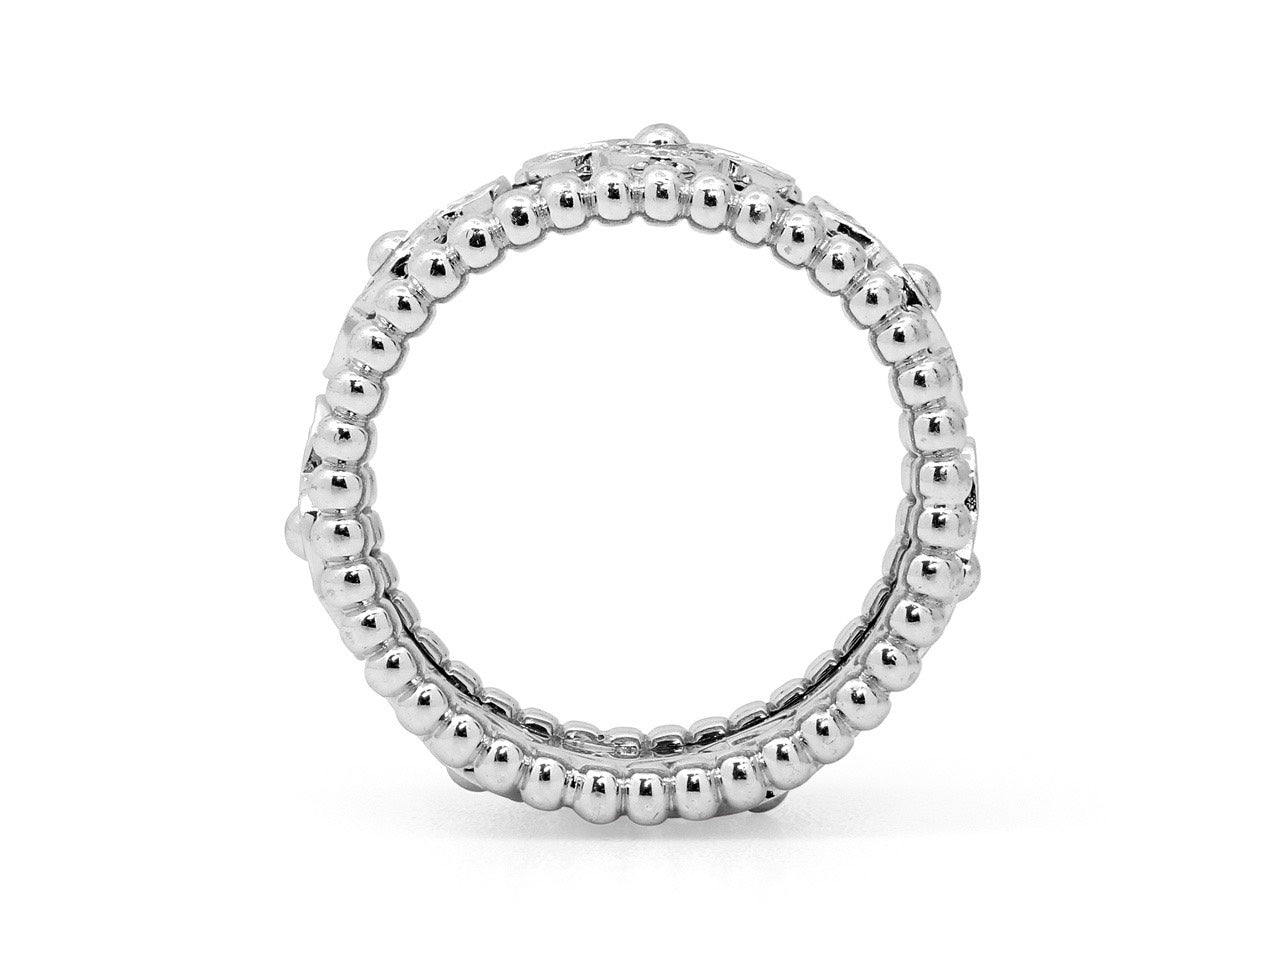 Van Cleef & Arpels 'Perlée' Clovers Ring in 18K White Gold, Size 53